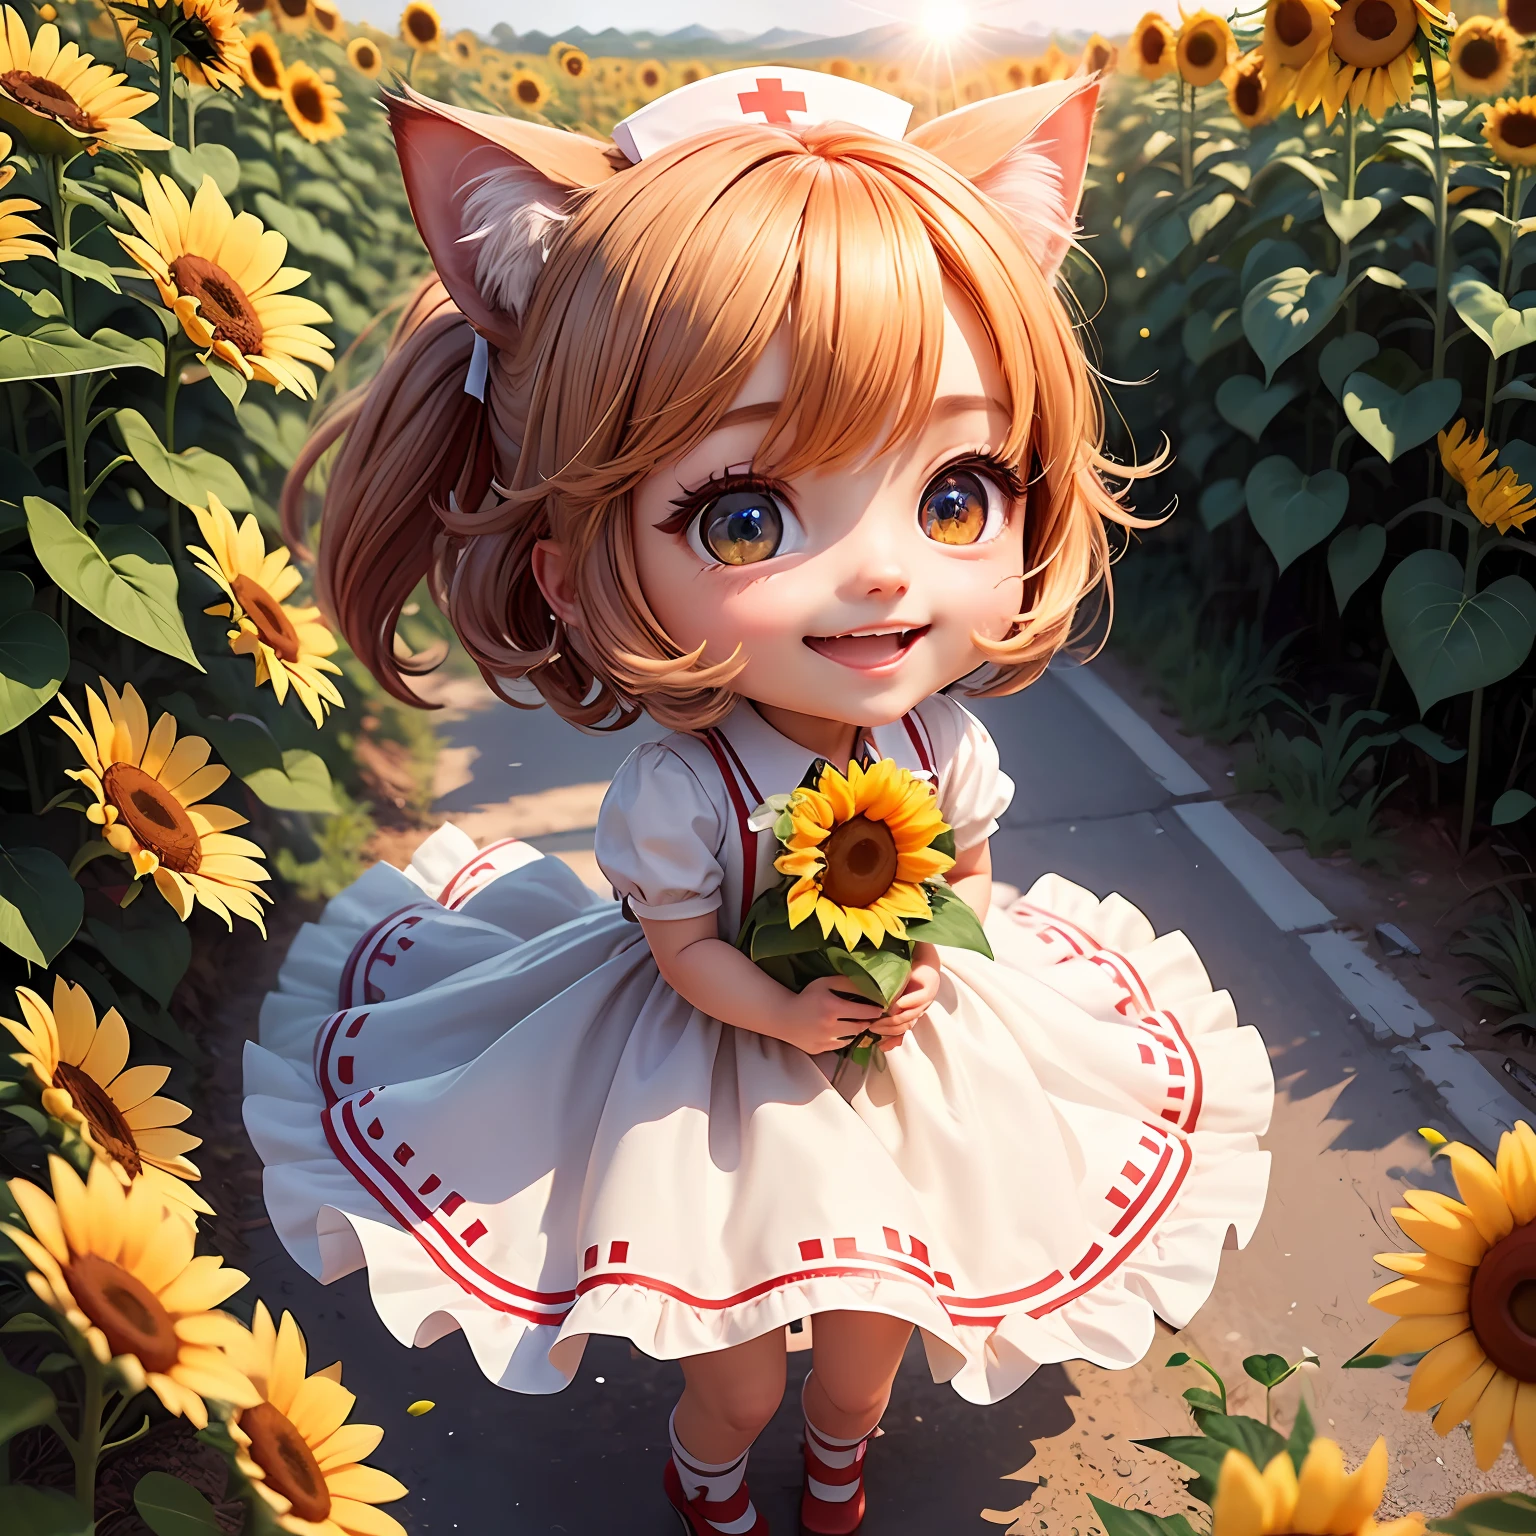 A masterpice、best  quality、ultra detaild、One Cat Girl、Chibi Chara、nurse outfit、smile on face、Open one's mouth、Sun flower、full bloom、Sunflower field、the sun、natsu、wide、Shot from above、Jumpy、The wind is blowing、sund、Beautiful eyes、pretty hair